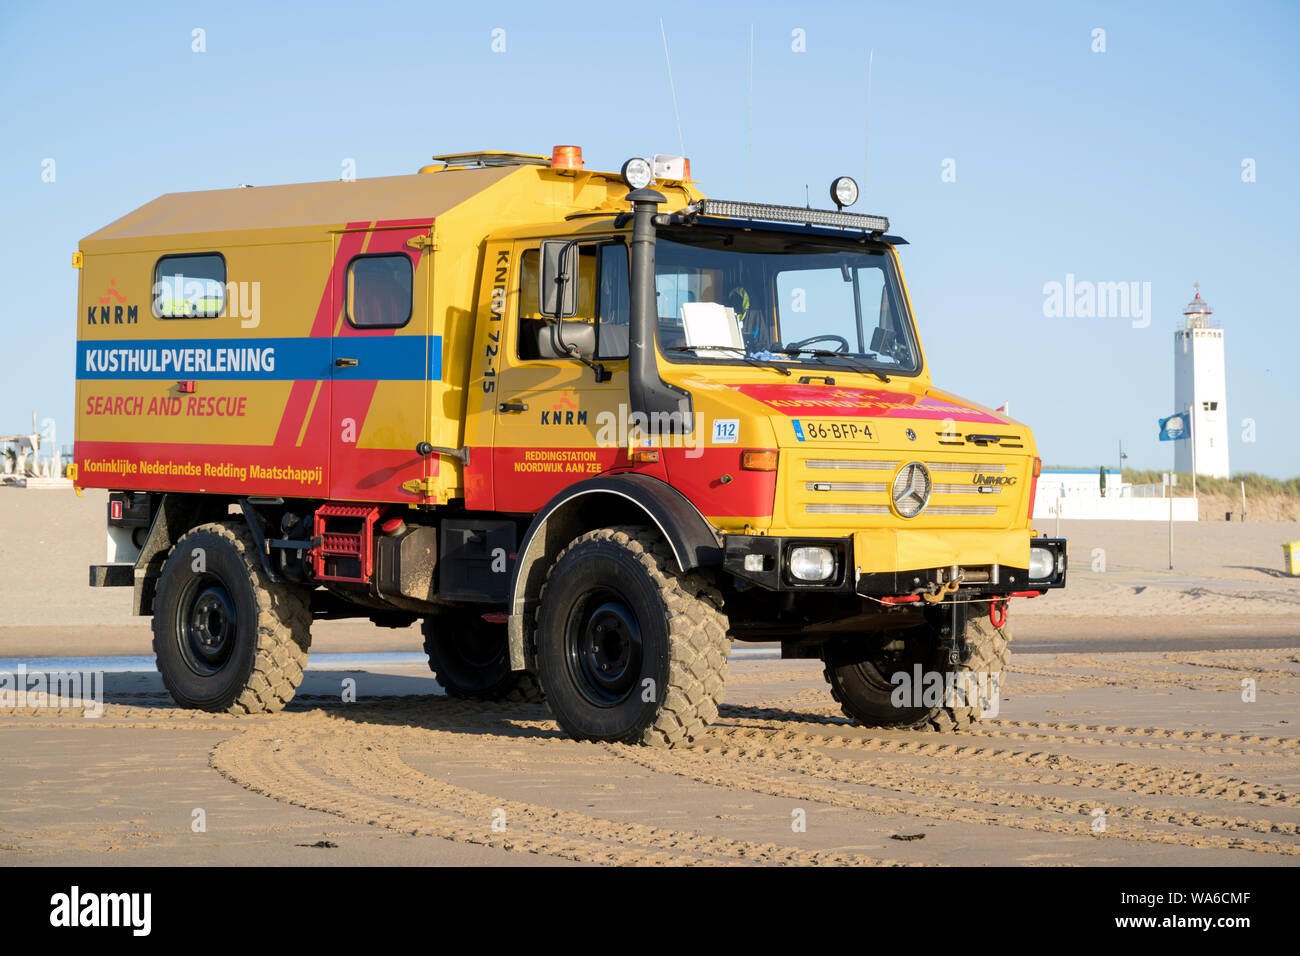 KNRM Mercedes-Benz Unimog on the beach. KNRM is the voluntary organization in the Netherlands tasked with saving lives at sea. Stock Photo